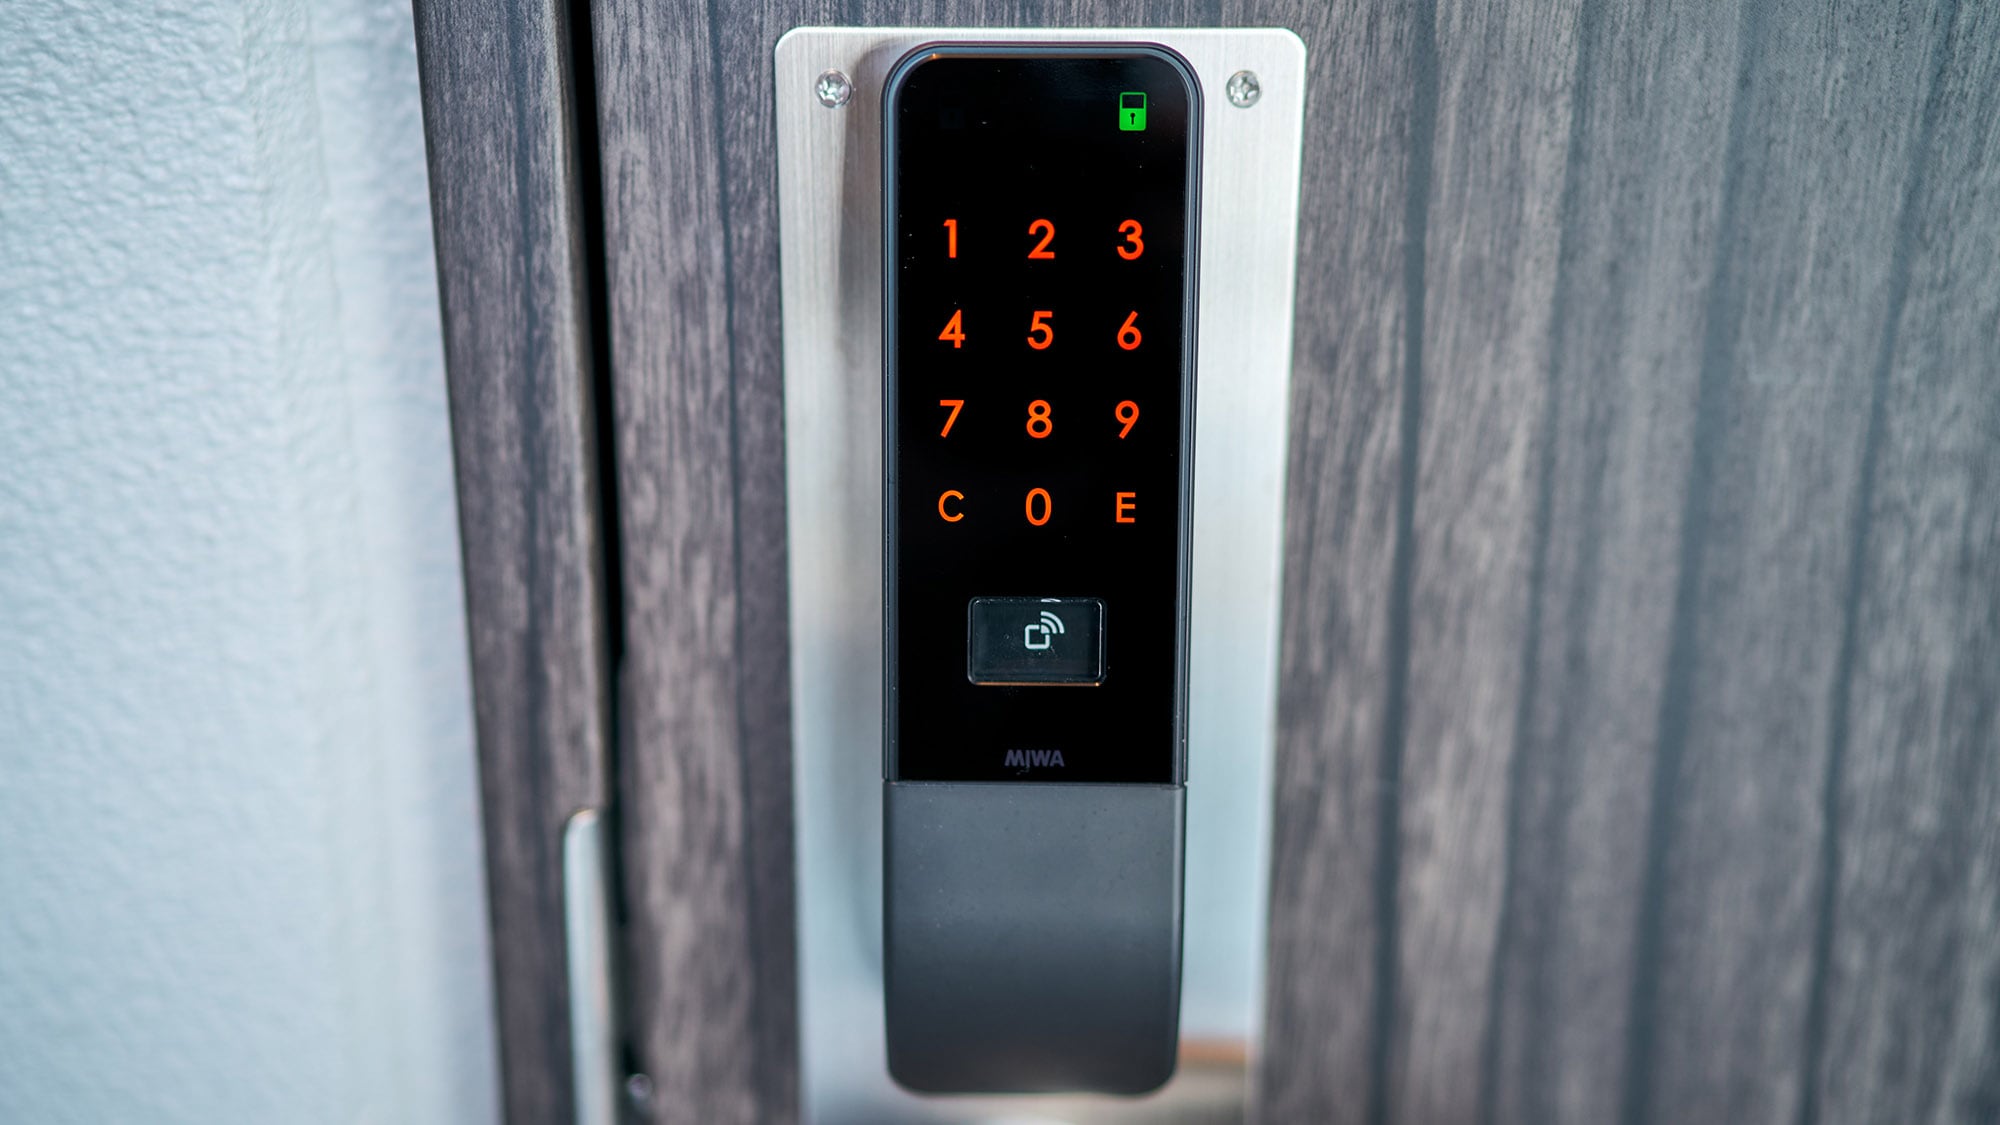 Smart lock / entry is smooth with the key number!